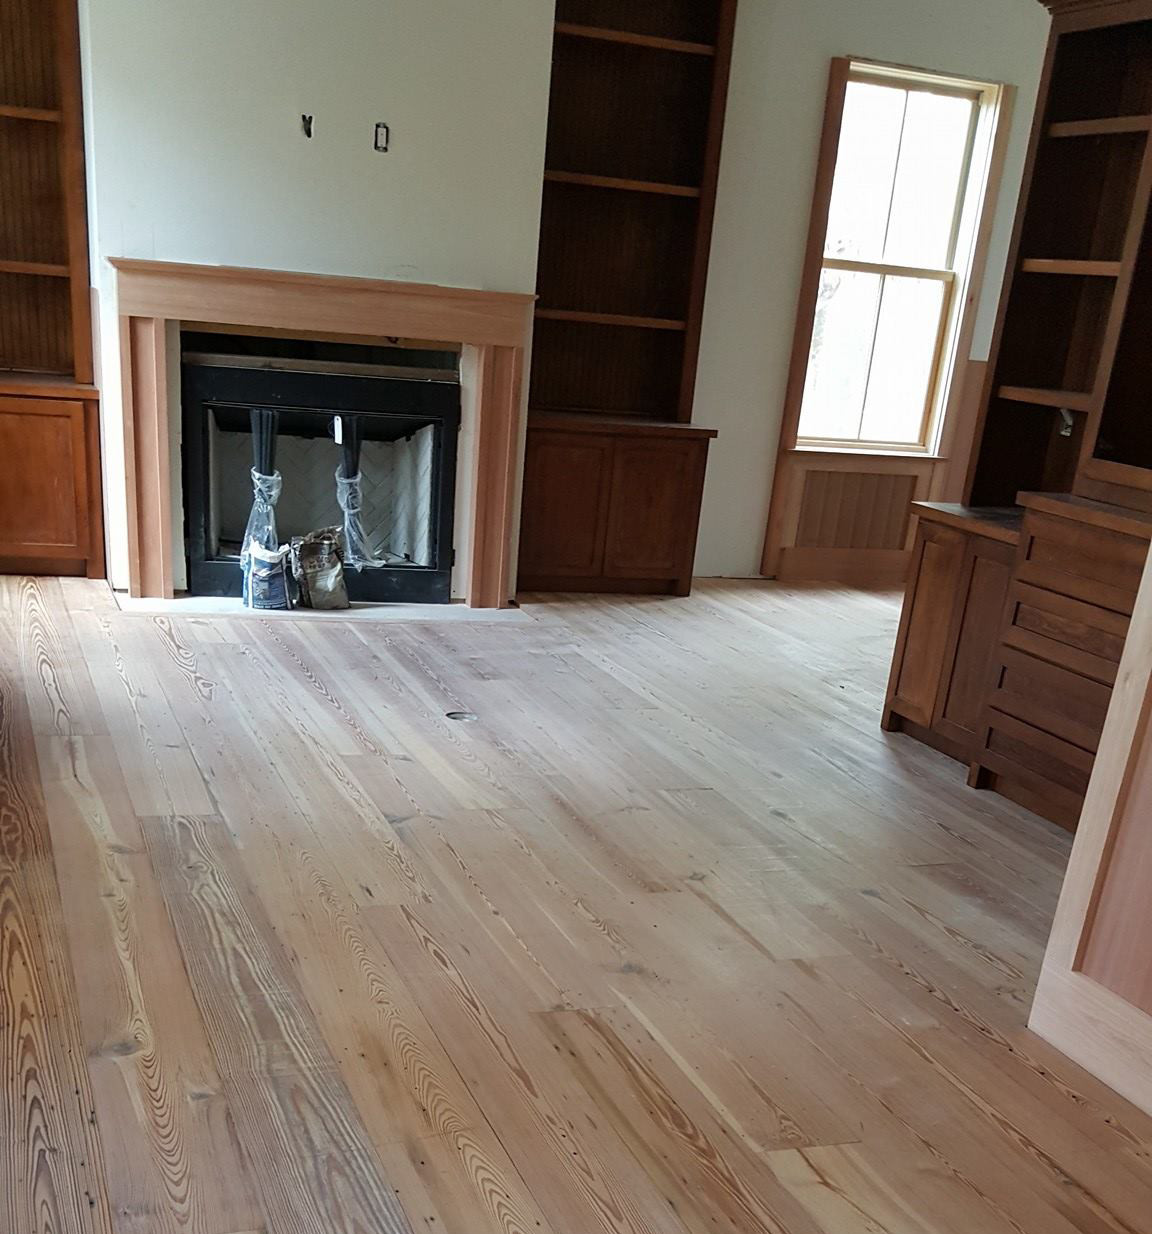 23 Fabulous How Much Will It Cost to Install Hardwood Floors 2024 free download how much will it cost to install hardwood floors of olde savannah hardwood flooring in sand and refinish existing floors